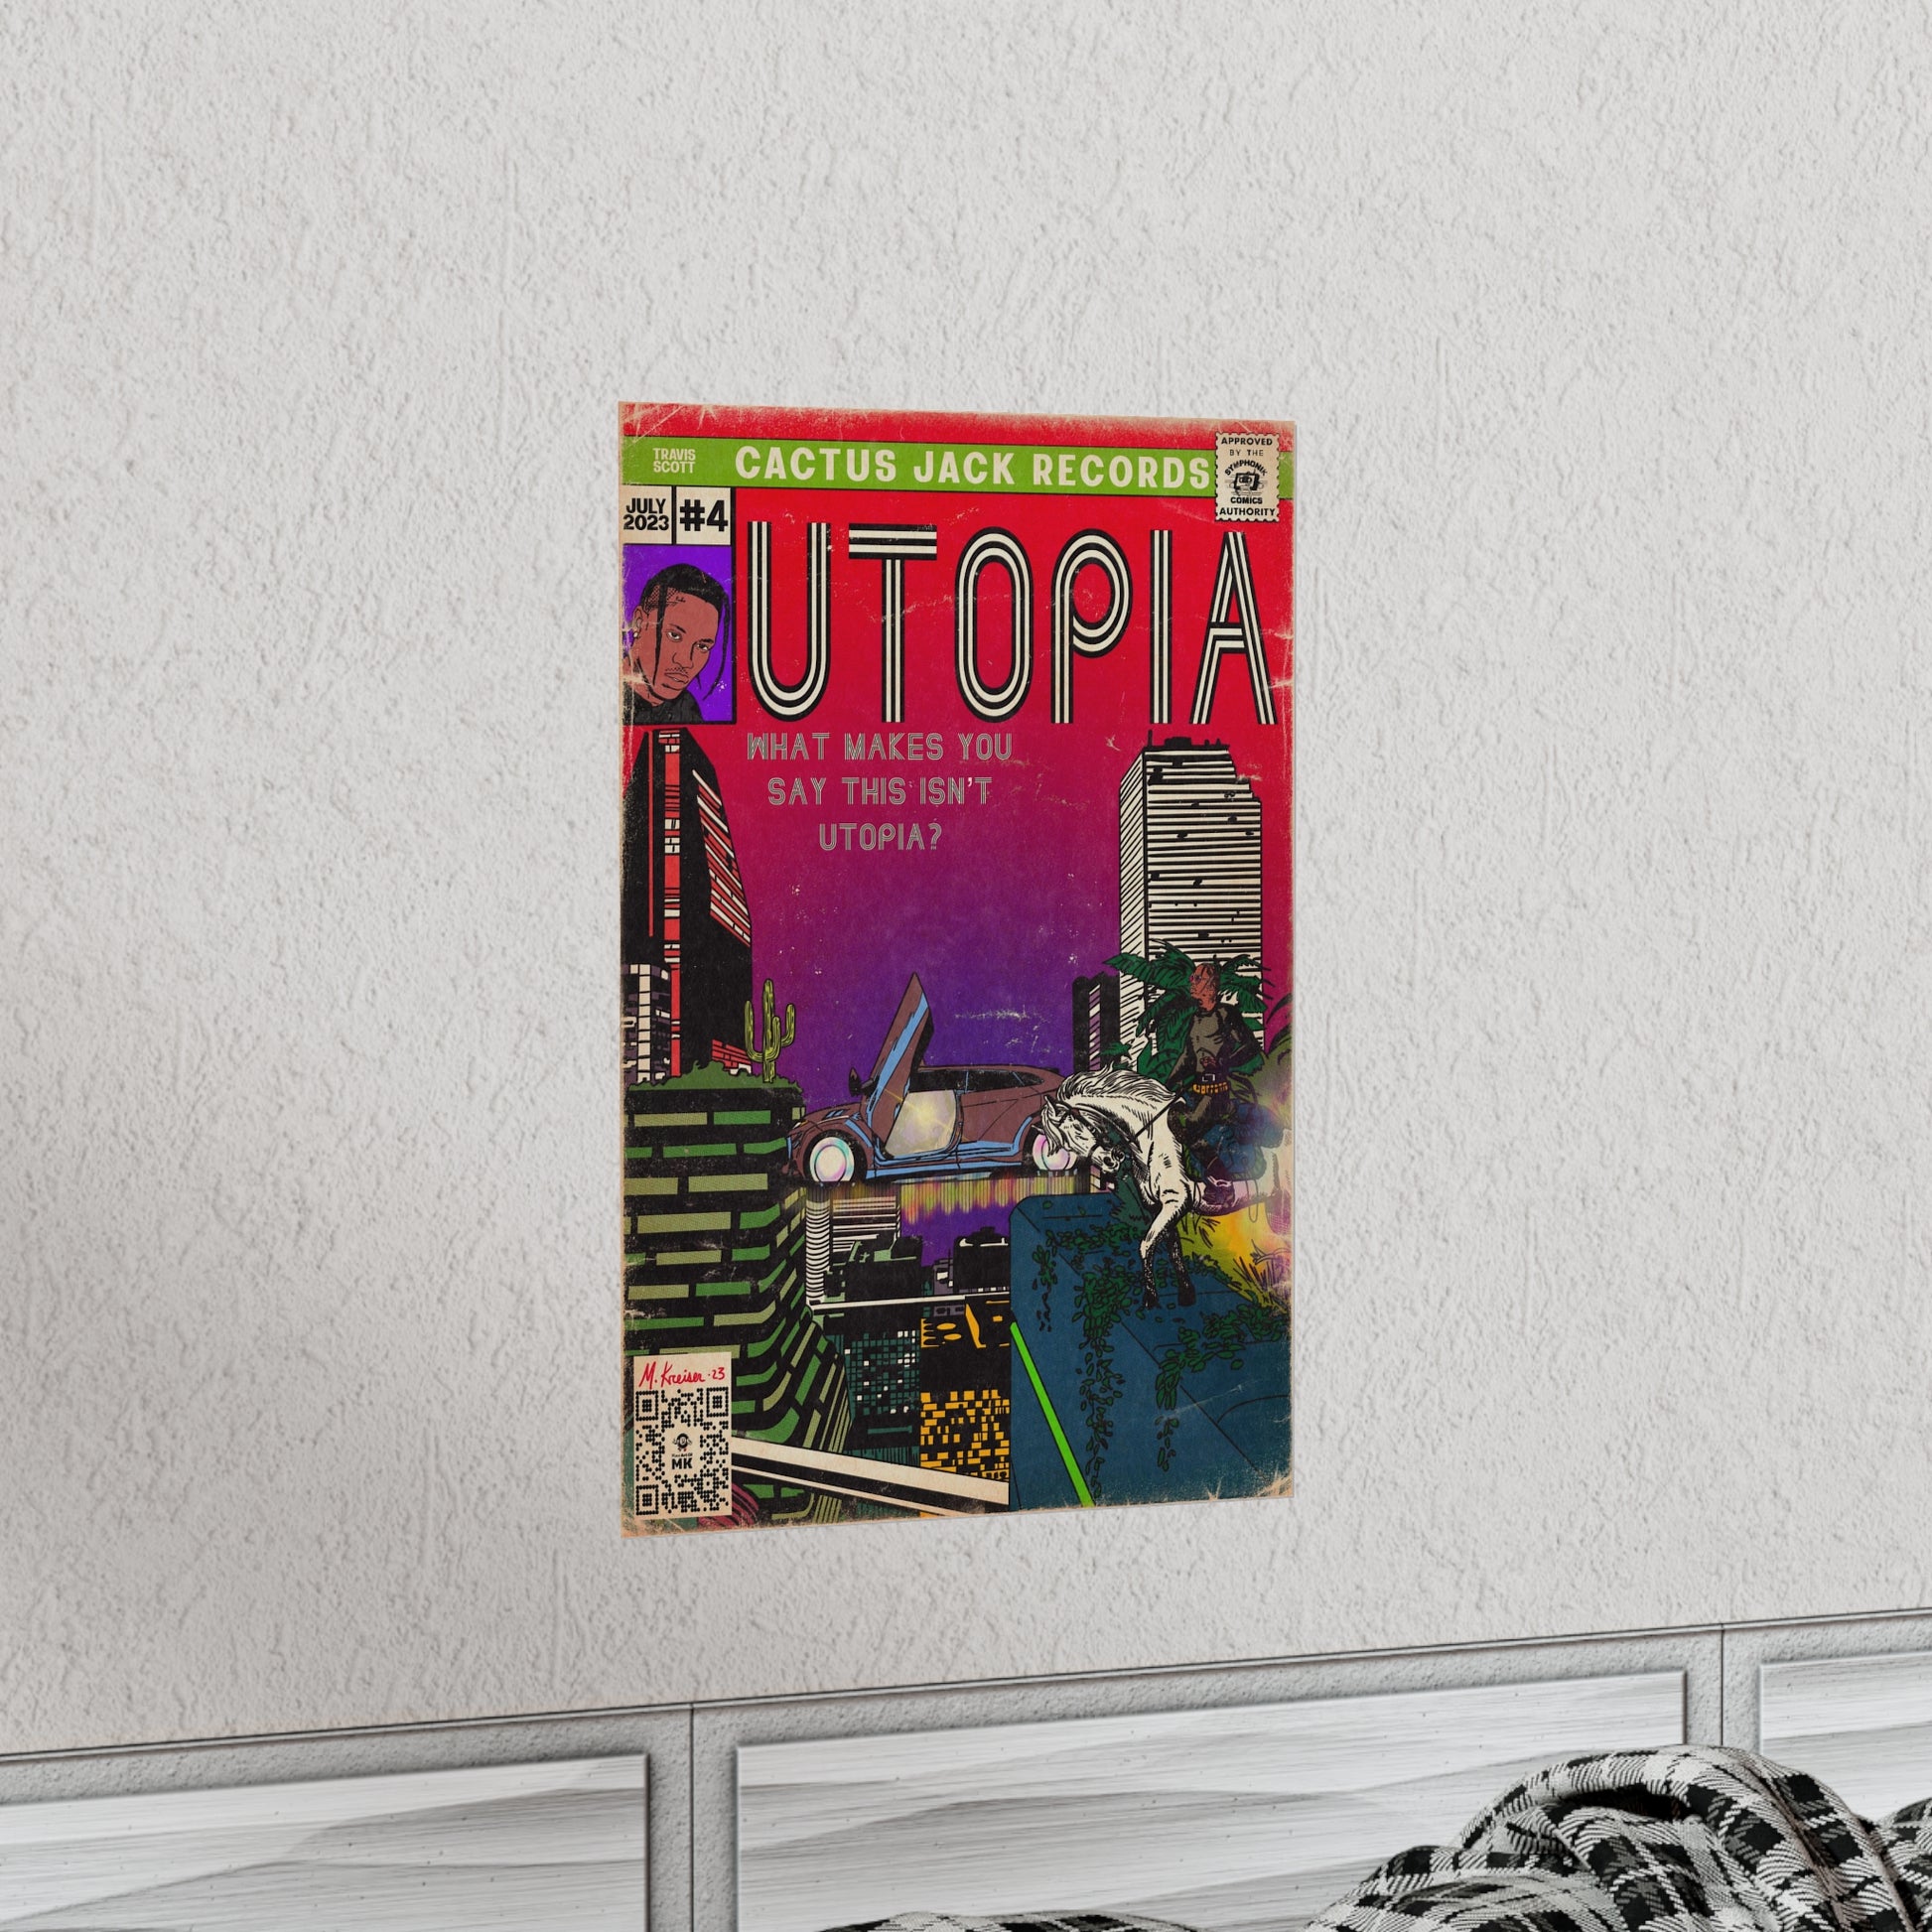 Posters Travis Scott Utopia - Only €11.95 – Posters Base